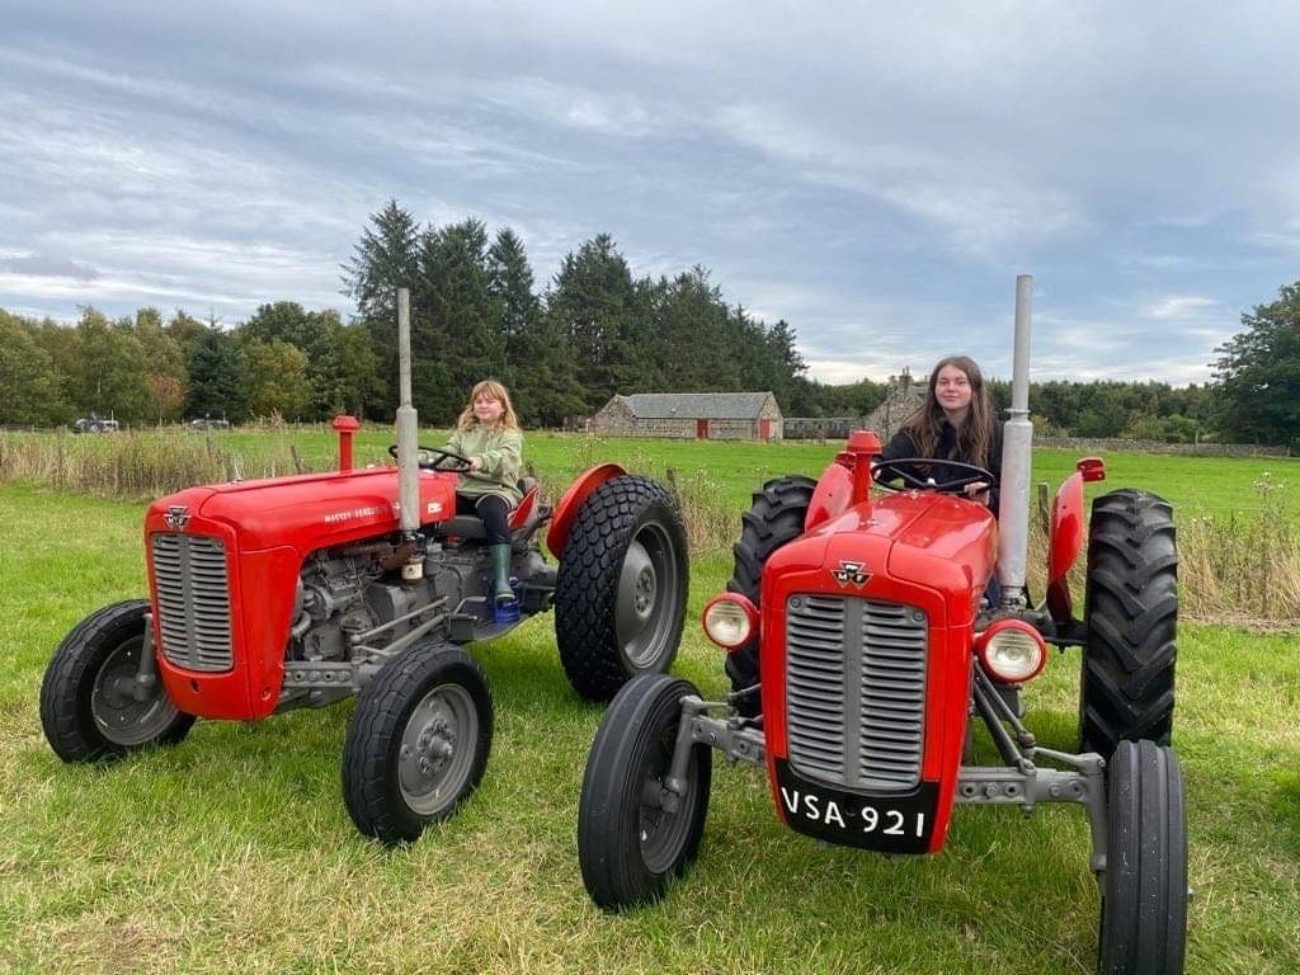 Join the Fun at the Charity Tractor Run in Inverurie with a Twist!